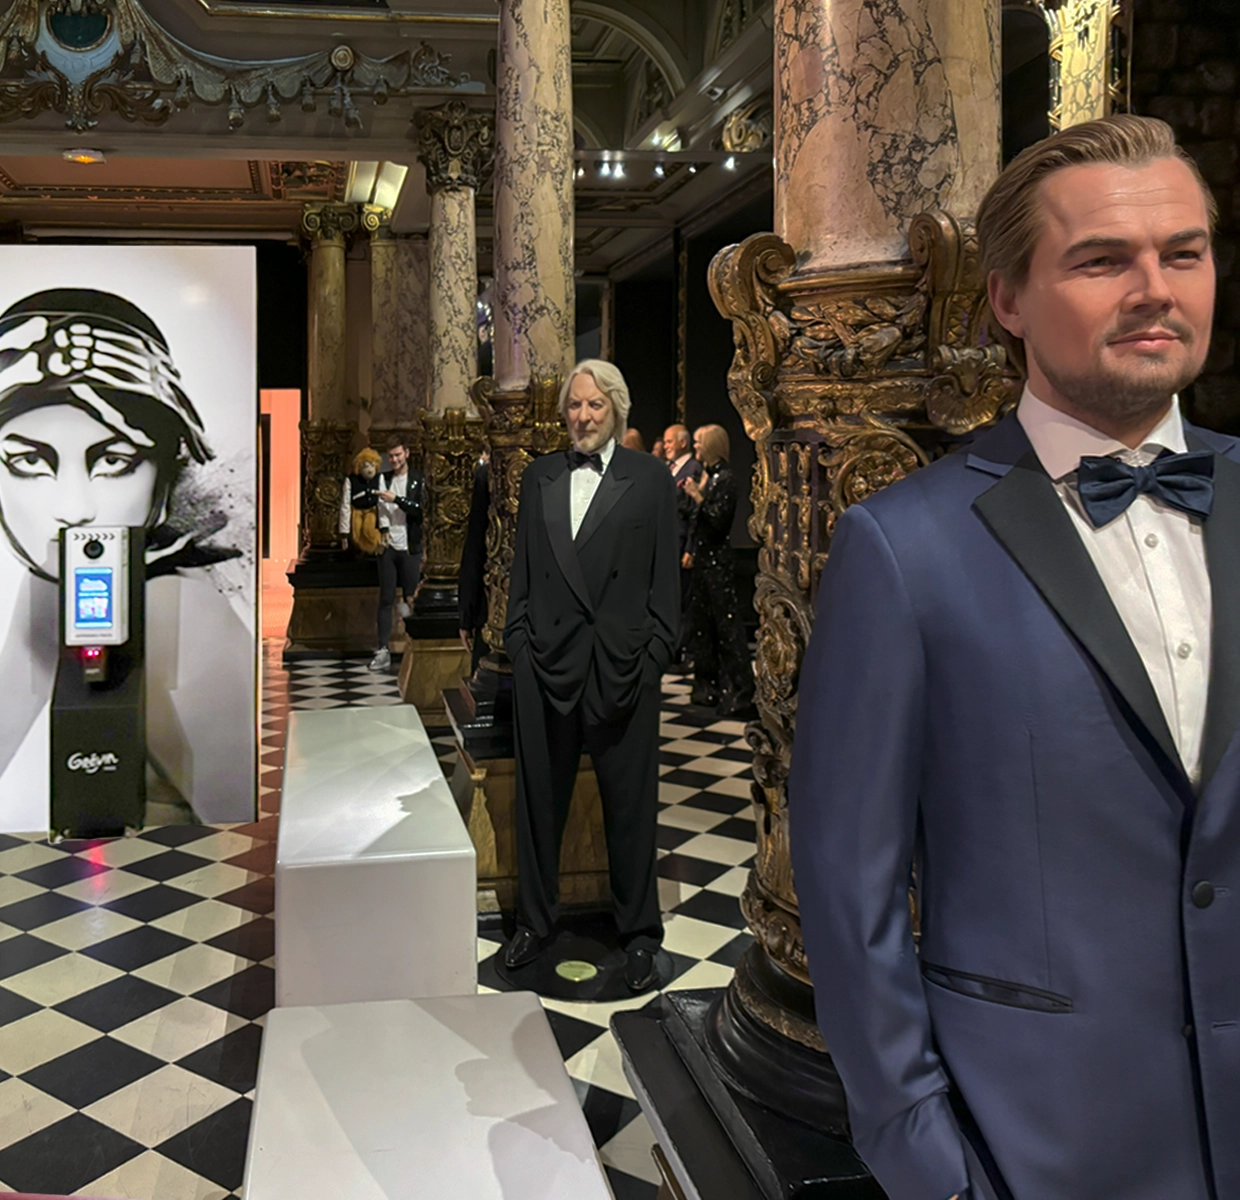 Enthusiastic guests pose alongside wax figures of iconic characters like Leonardo Dicaprio, immortalizing their visit to a popular entertainment attraction.